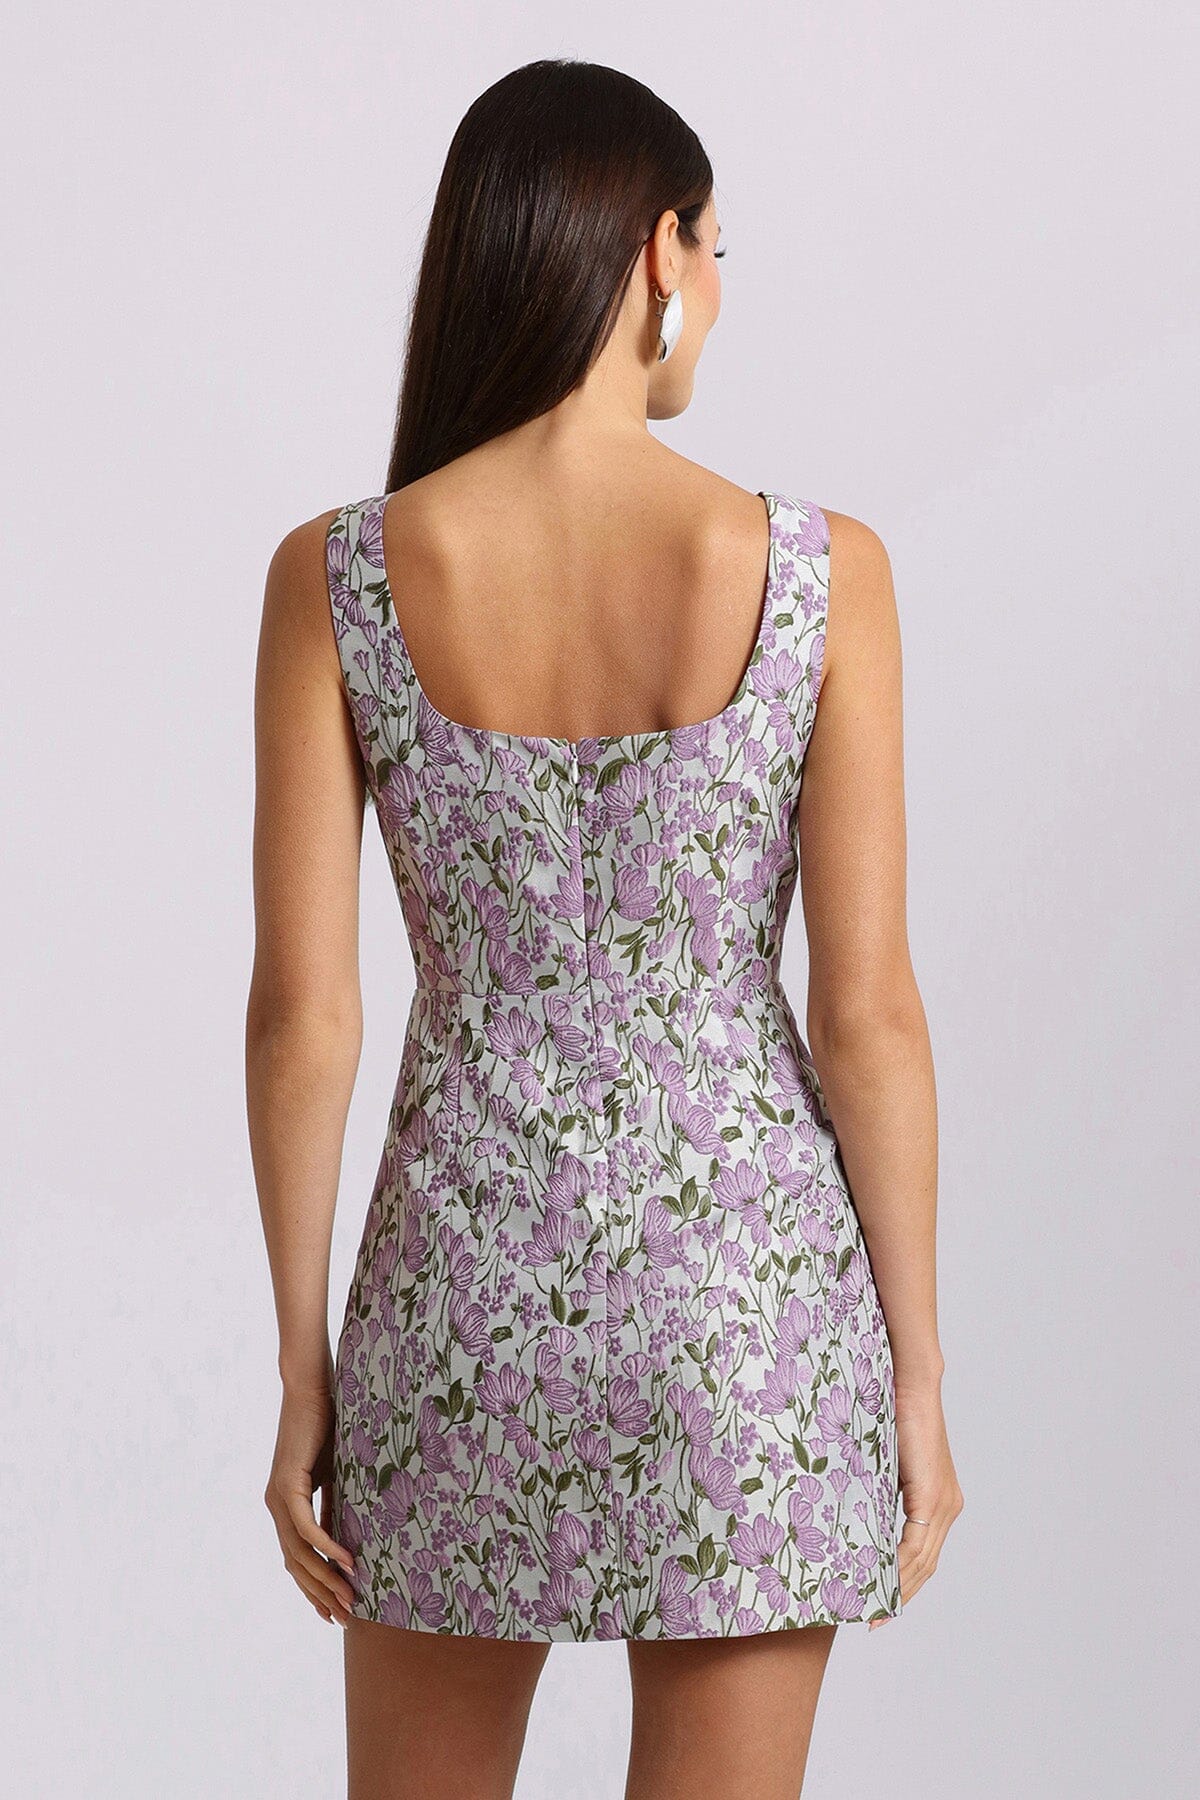 Lilac ivory floral jacquard tailored mini dress - women's figure flattering spring summer date night dresses by Avec Les Filles